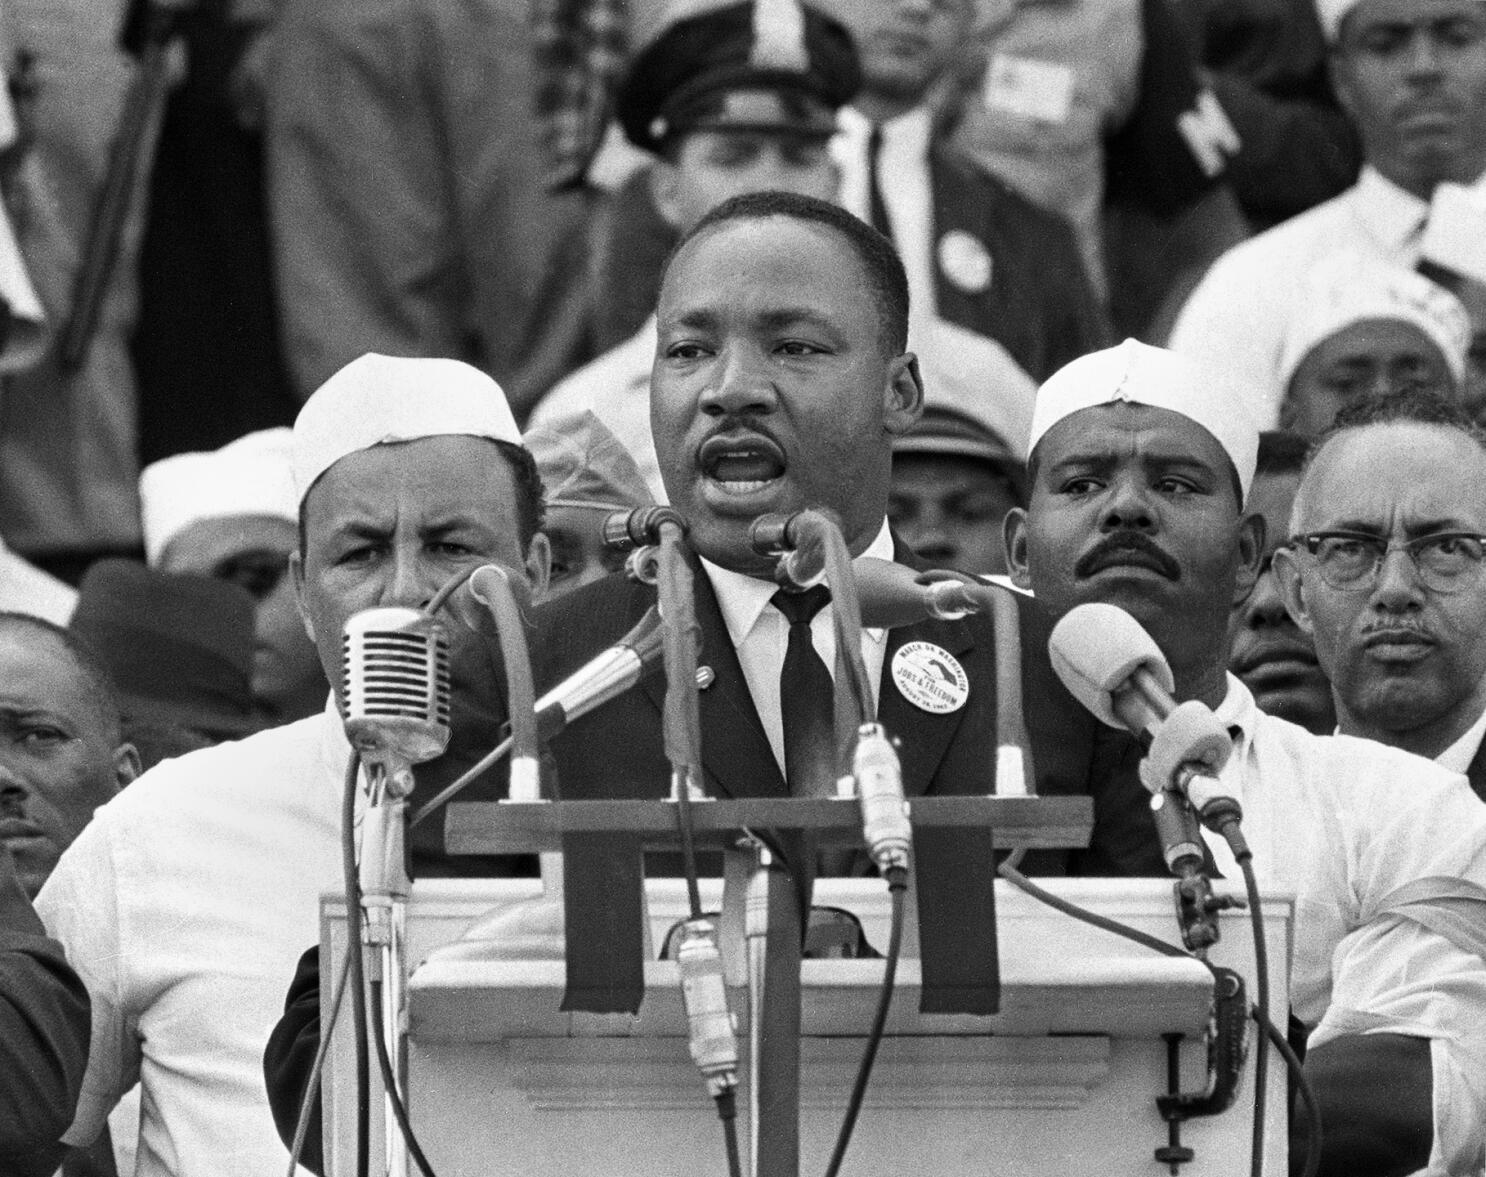 Opinion: Dr. King's sermon on 'the drum major instinct' is relevant today.  Here's what he meant. - The San Diego Union-Tribune